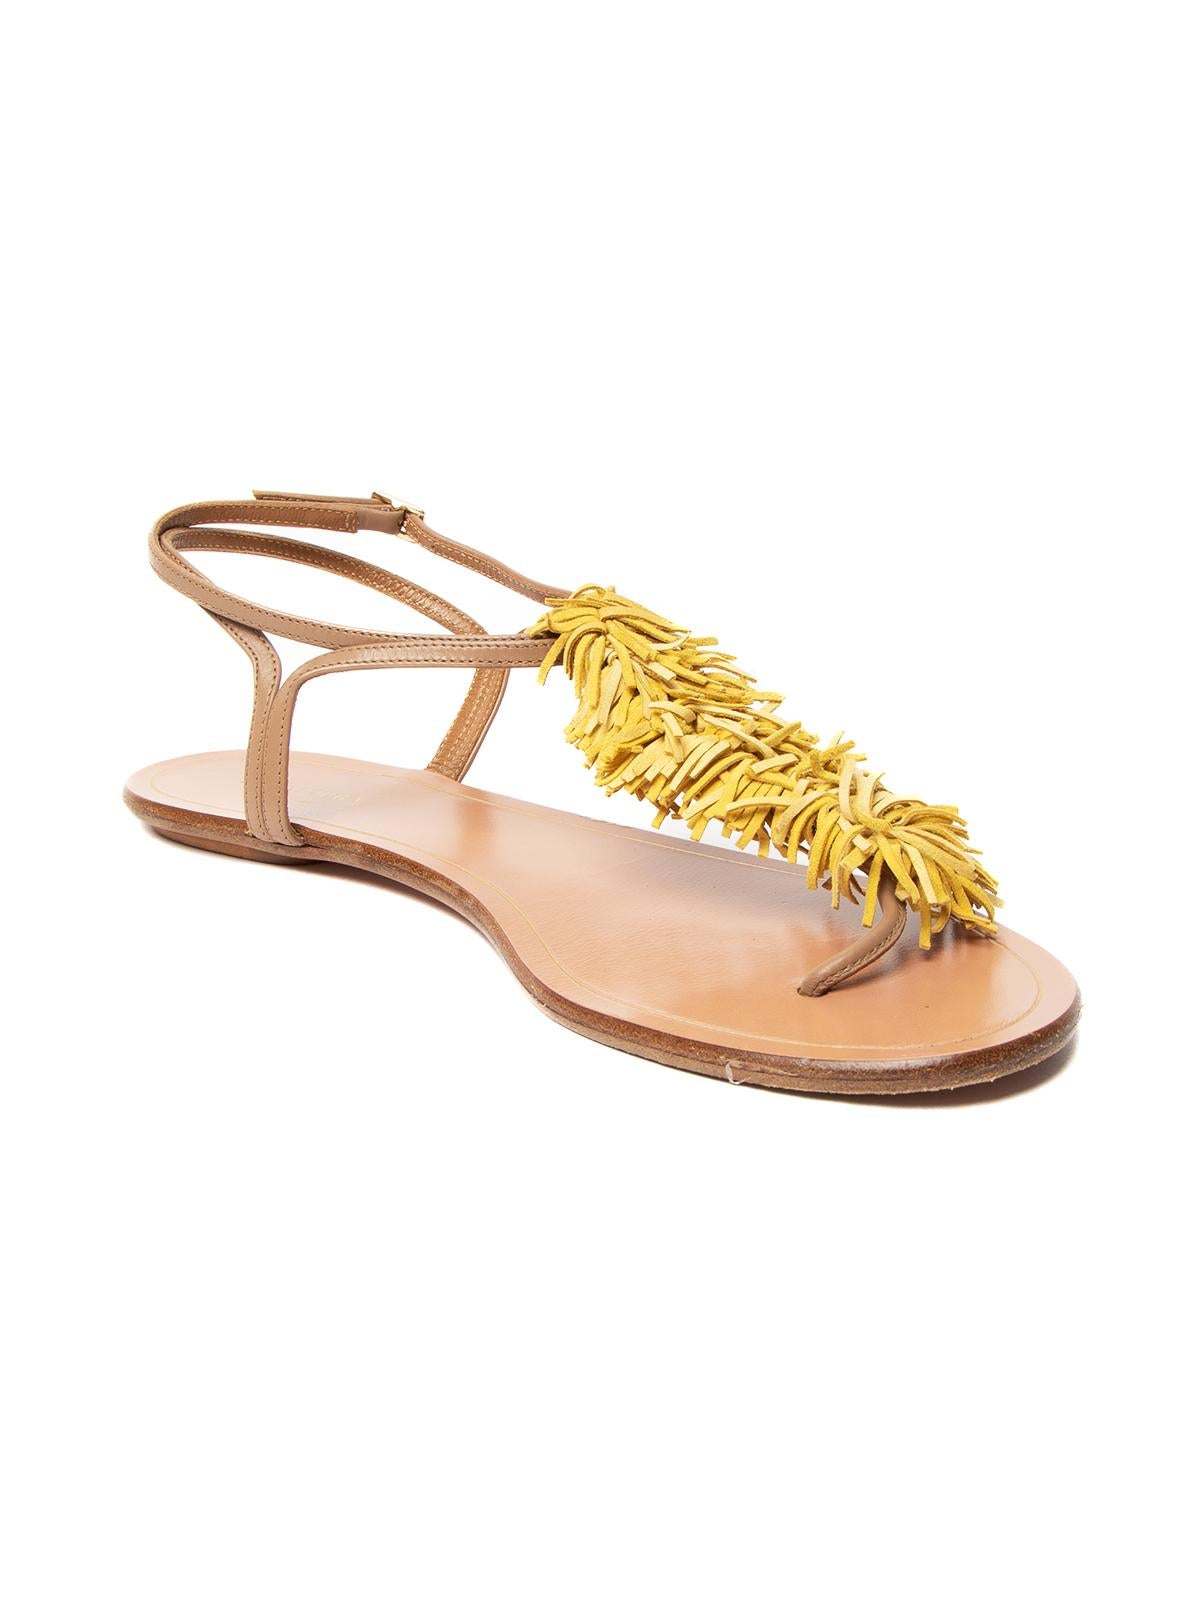 CONDITION is Good. Some wear to sandals is evident. Wear to outersole and edges on this used Aquazzura designer resale item. Details Yellow Leather Tassel embellishment on front Slingback Buckle fastening Leather insoles embossed with Aquazura logo